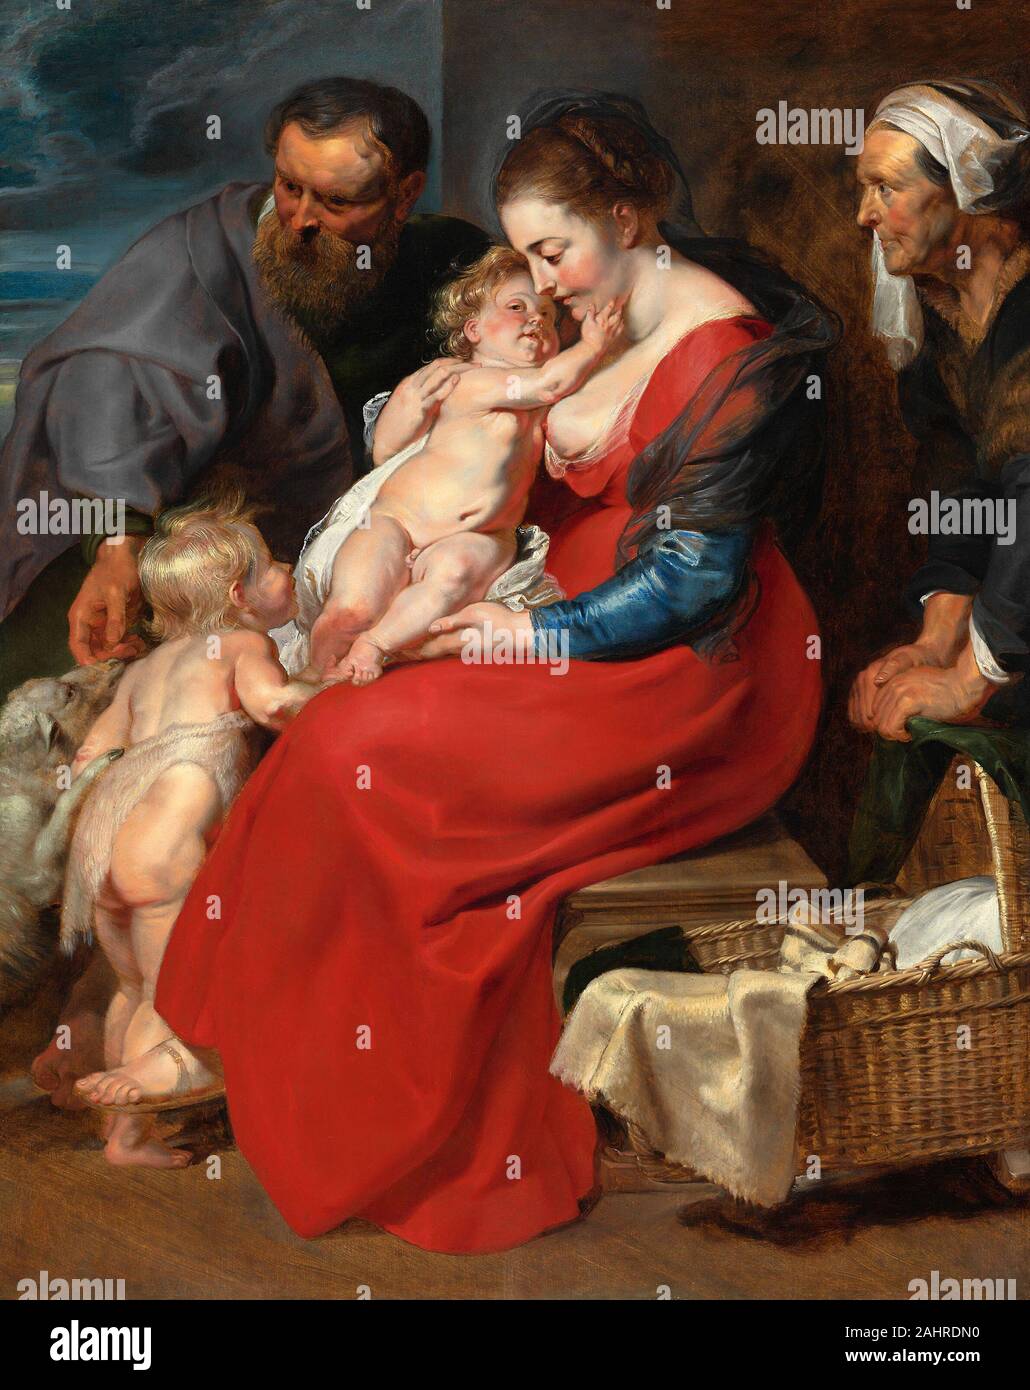 Peter Paul Rubens. The Holy Family with Saints Elizabeth and John the Baptist. 1610–1620. Flanders. Oil on panel This painting of the Holy Family is one of several completed in the decade after Peter Paul Rubens returned to his native Antwerp, following an eight-year stay in Italy. Fully immersed in Italian art, the prodigiously productive artist had acquired such facility in handling brush, color, ?gures, and drapery and in arranging large-scale compositions that he was unrivaled north of the Alps. Here he displayed these skills not only by bringing a sacred subject to life but also by bringi Stock Photo